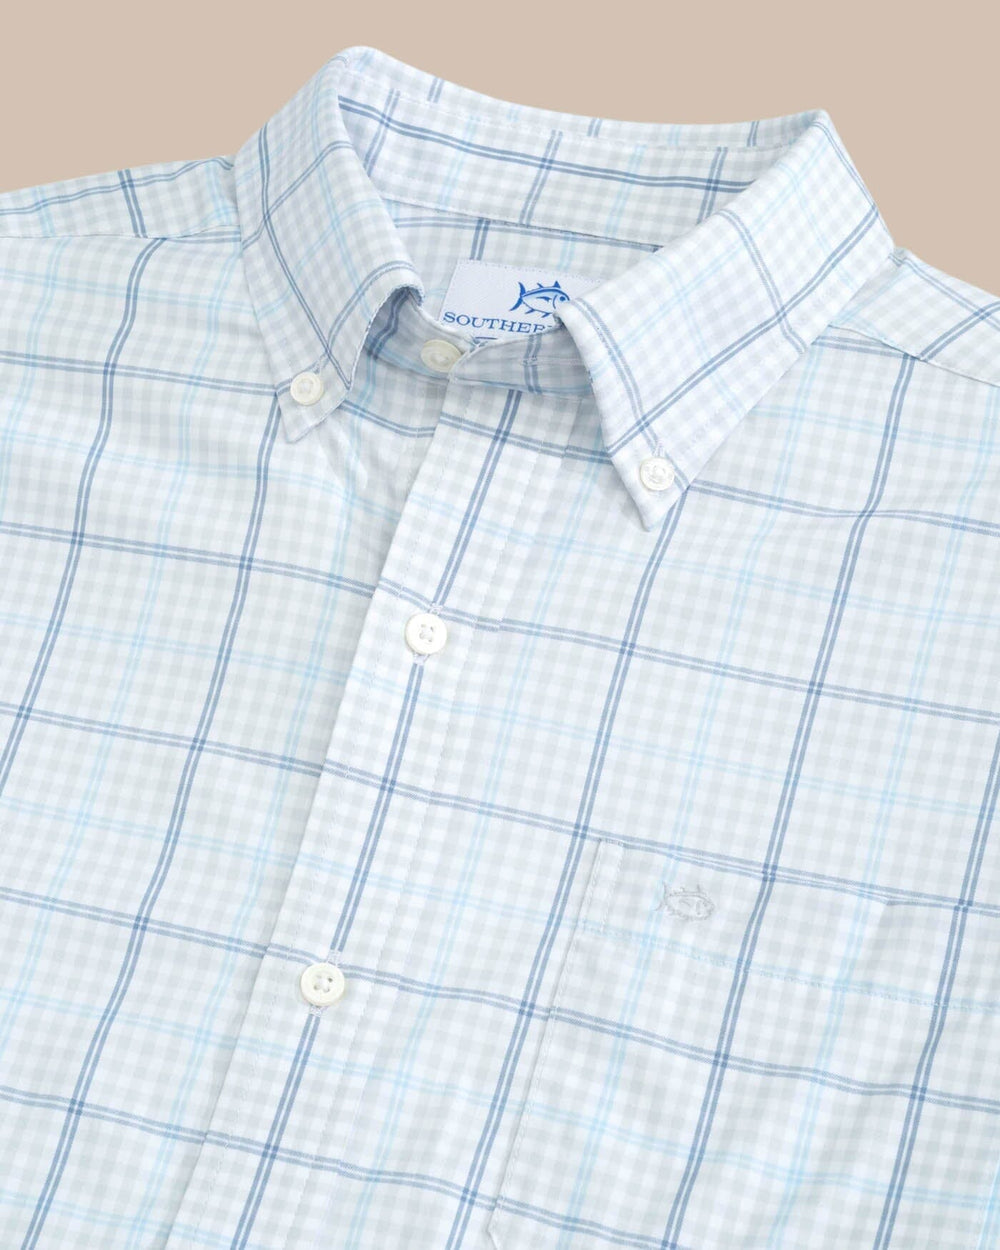 The detail view of the Southern Tide brrr Intercoastal Rainer Check Long Sleeve Sportshirt by Southern Tide - Platinum Grey